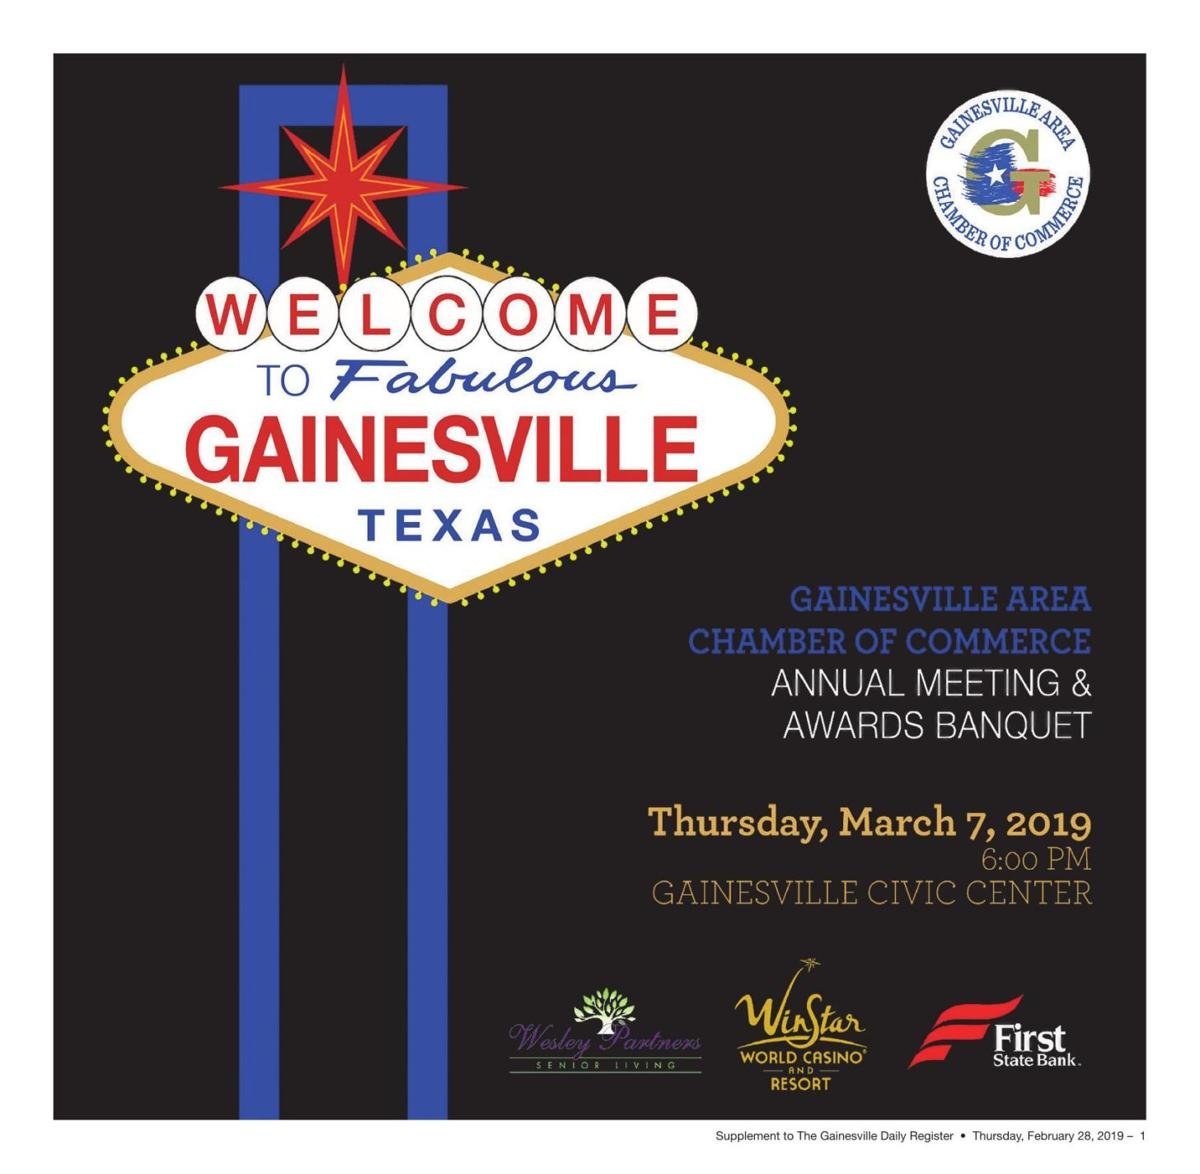 Gainesville Area Chamber of Commerce annual meeting 2019 Seasonal